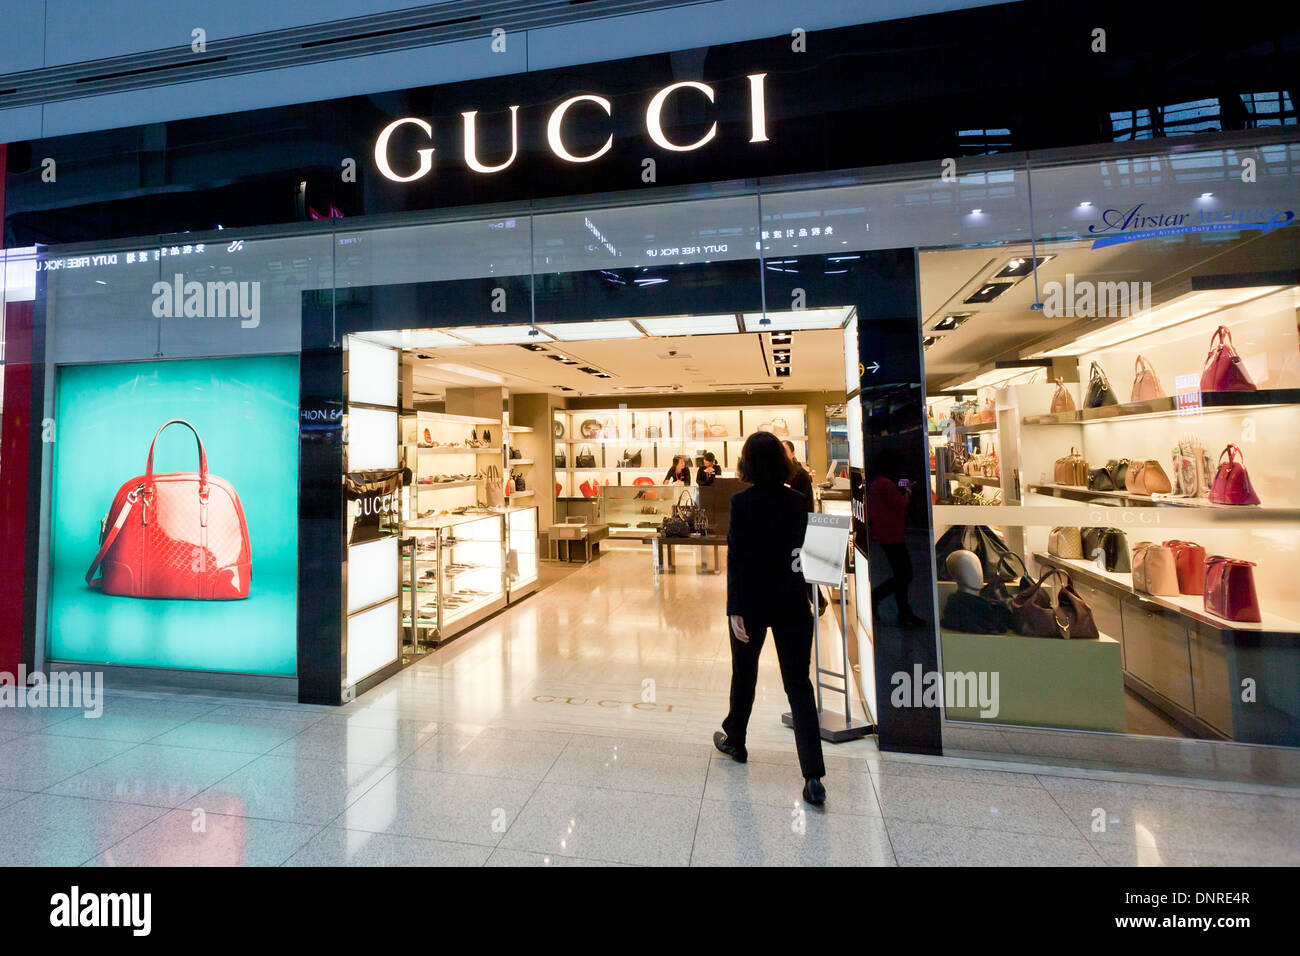 Gucci storefront at Incheon International Airport - South Korea Stock Photo  - Alamy